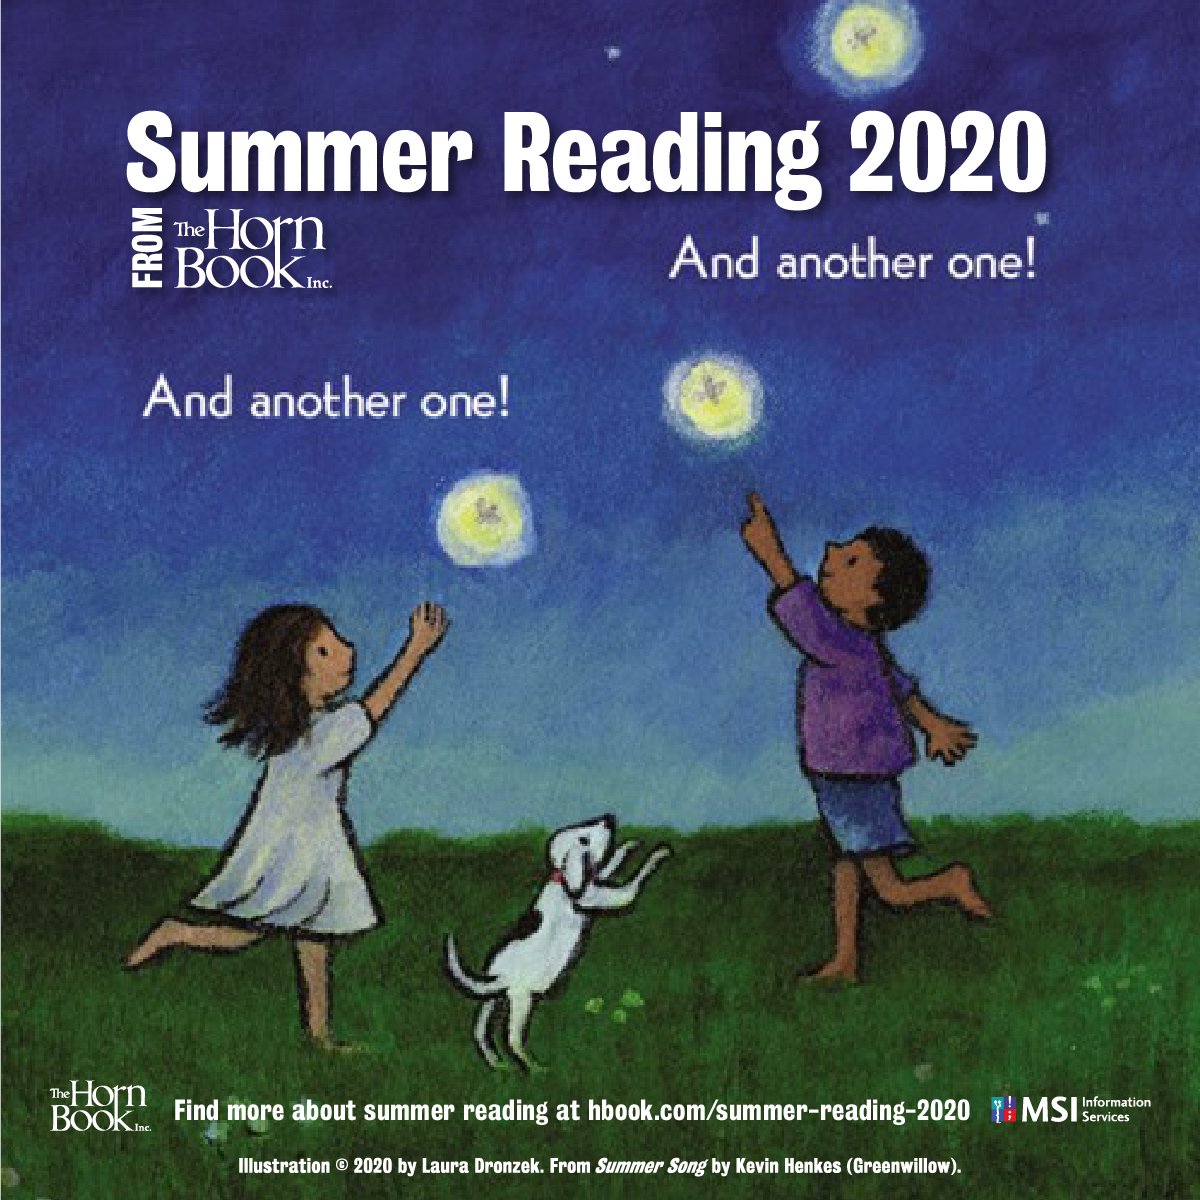 RT @HornBook: Saturday was the first (official) day of #summer Here's our annual #HBSummerReading list of #SummerReading  #pleasurereading suggestions for all ages  hbook.com/?detailStory=2…